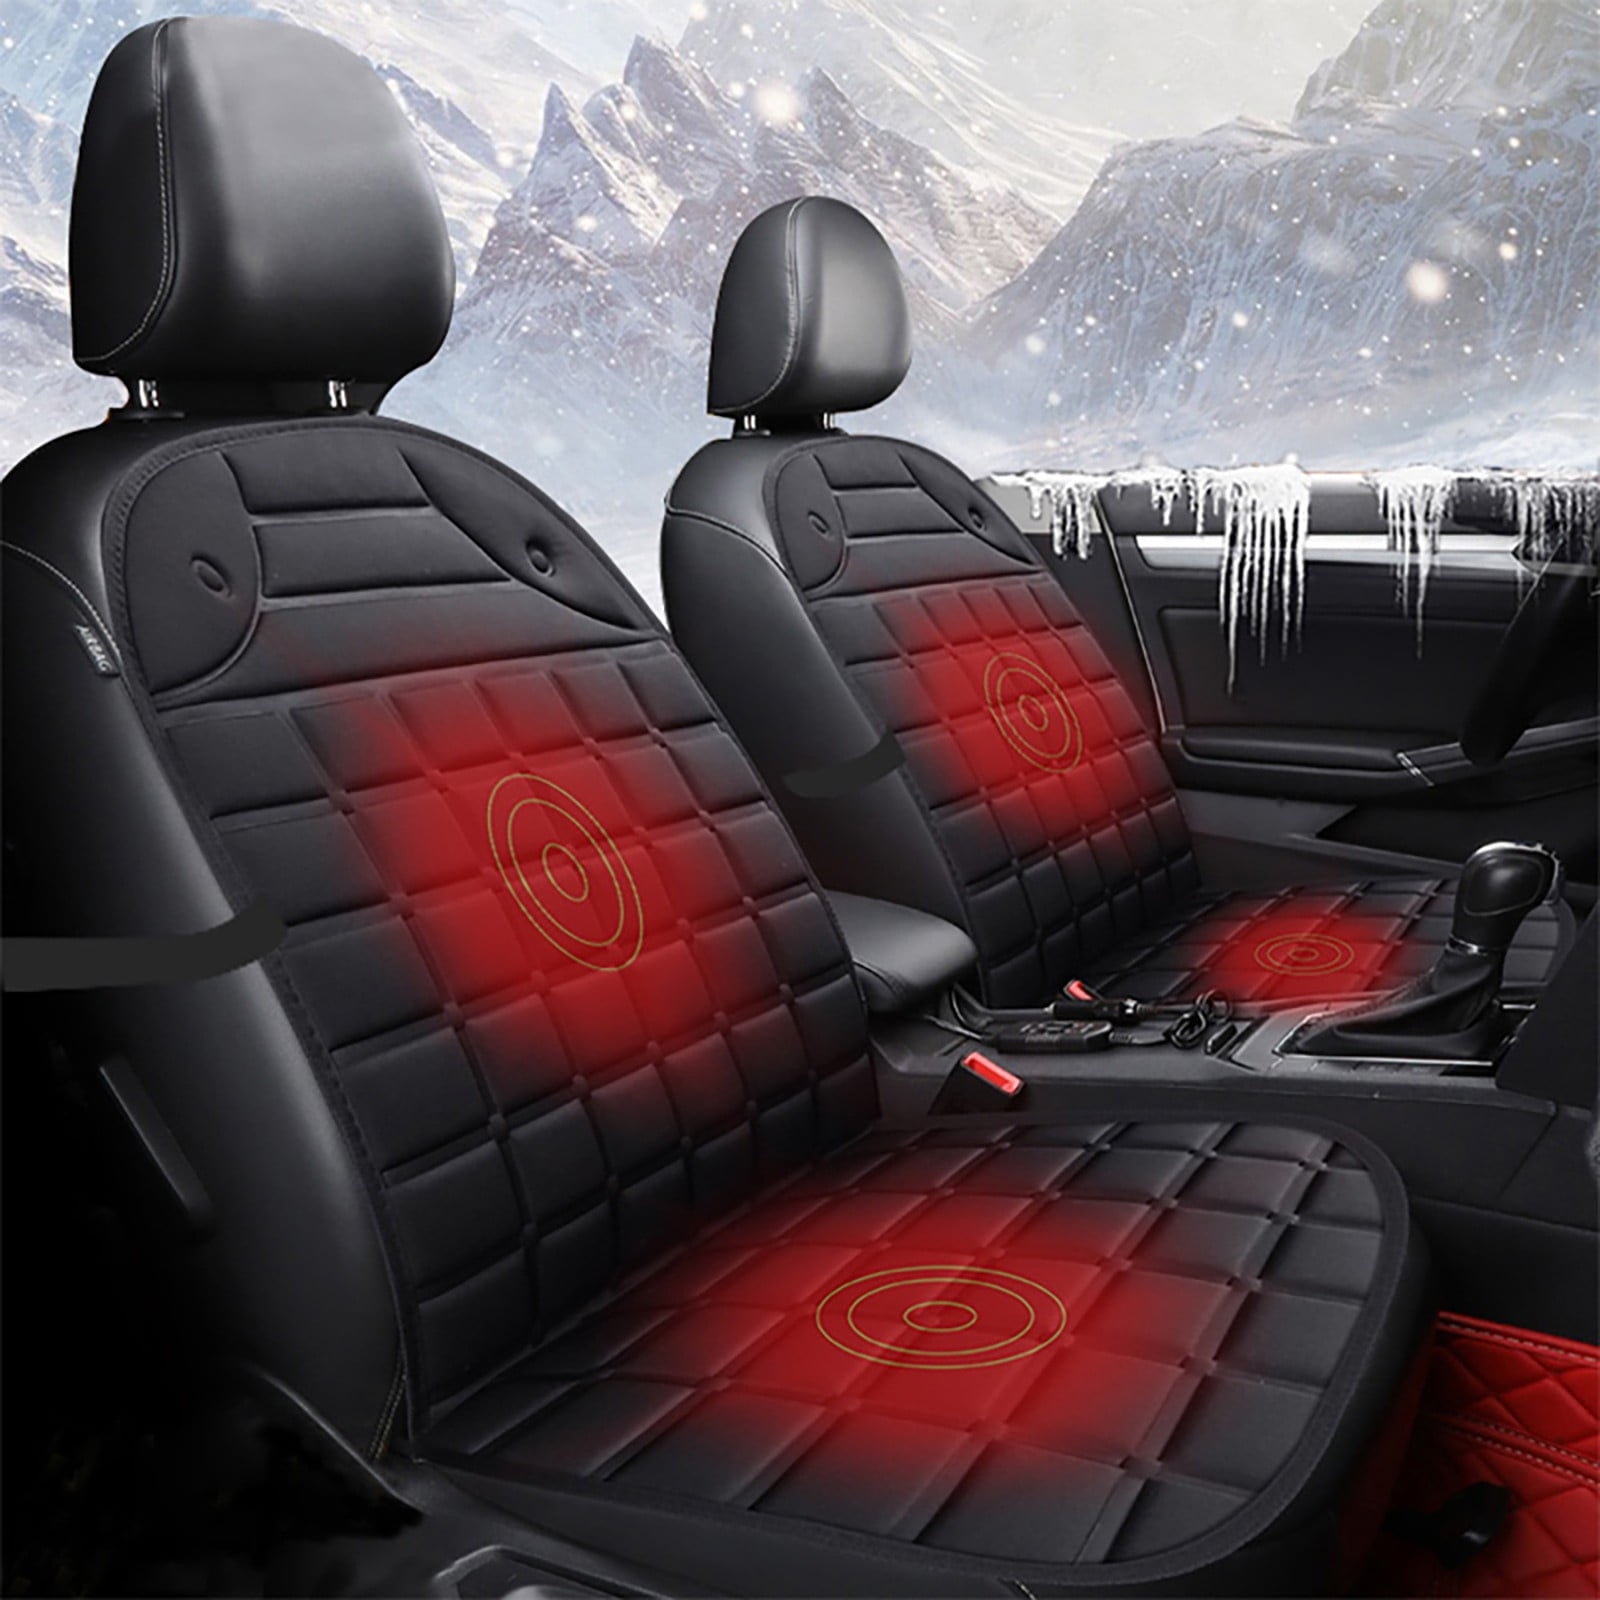 AutoLoc Power Accessories AUTHR2000 Carbon Fiber Heated Seat Kit with  Switch and Plug-and-Play Harness1 Seats